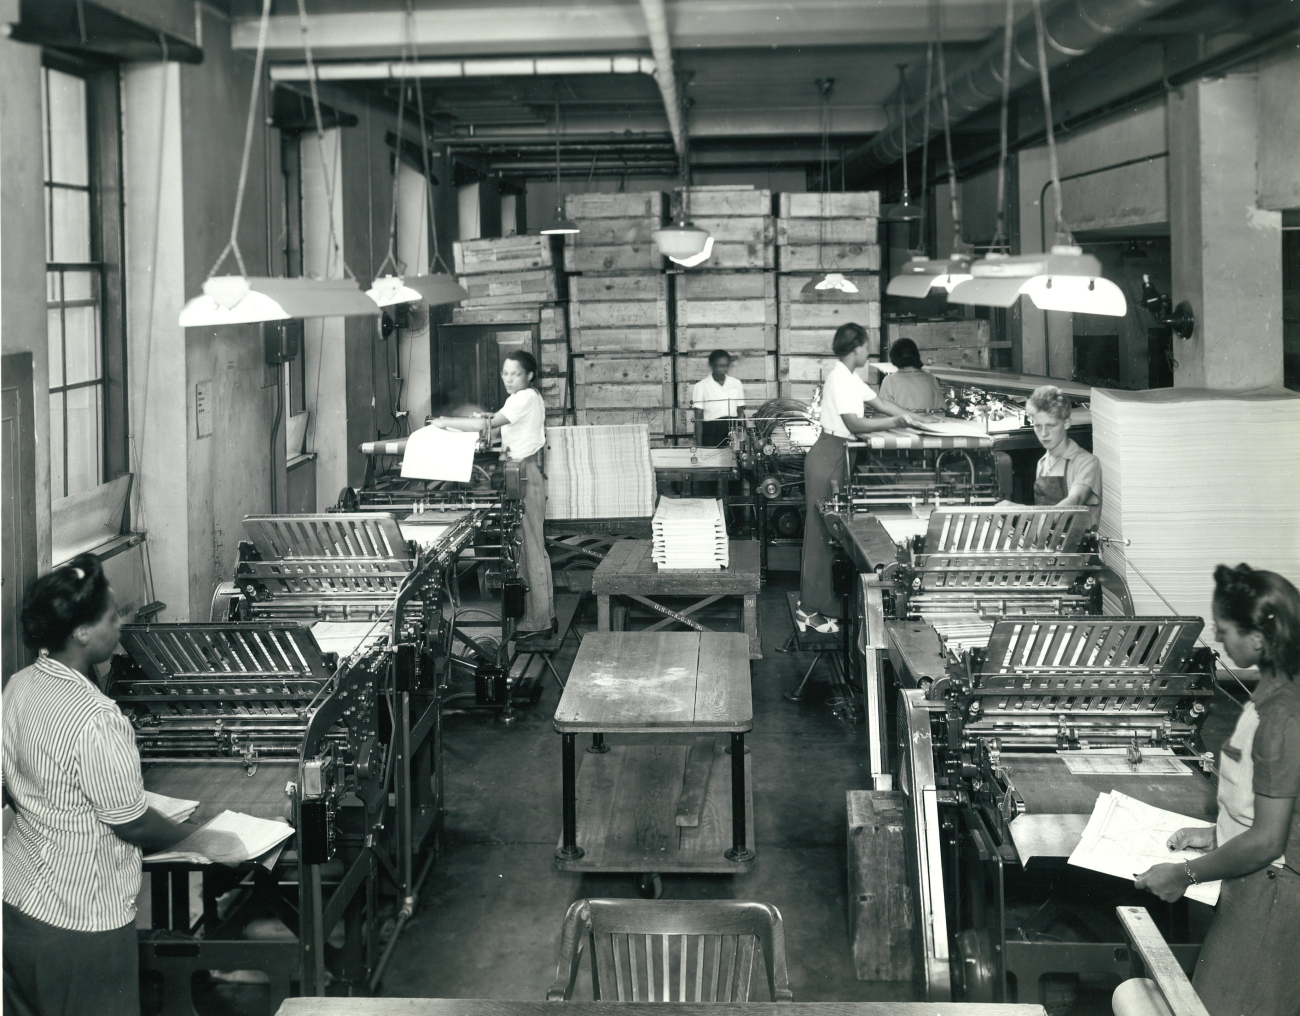 Women working in the cutting and folding rooms - the final preparation of mapsand charts prior to shipping to users